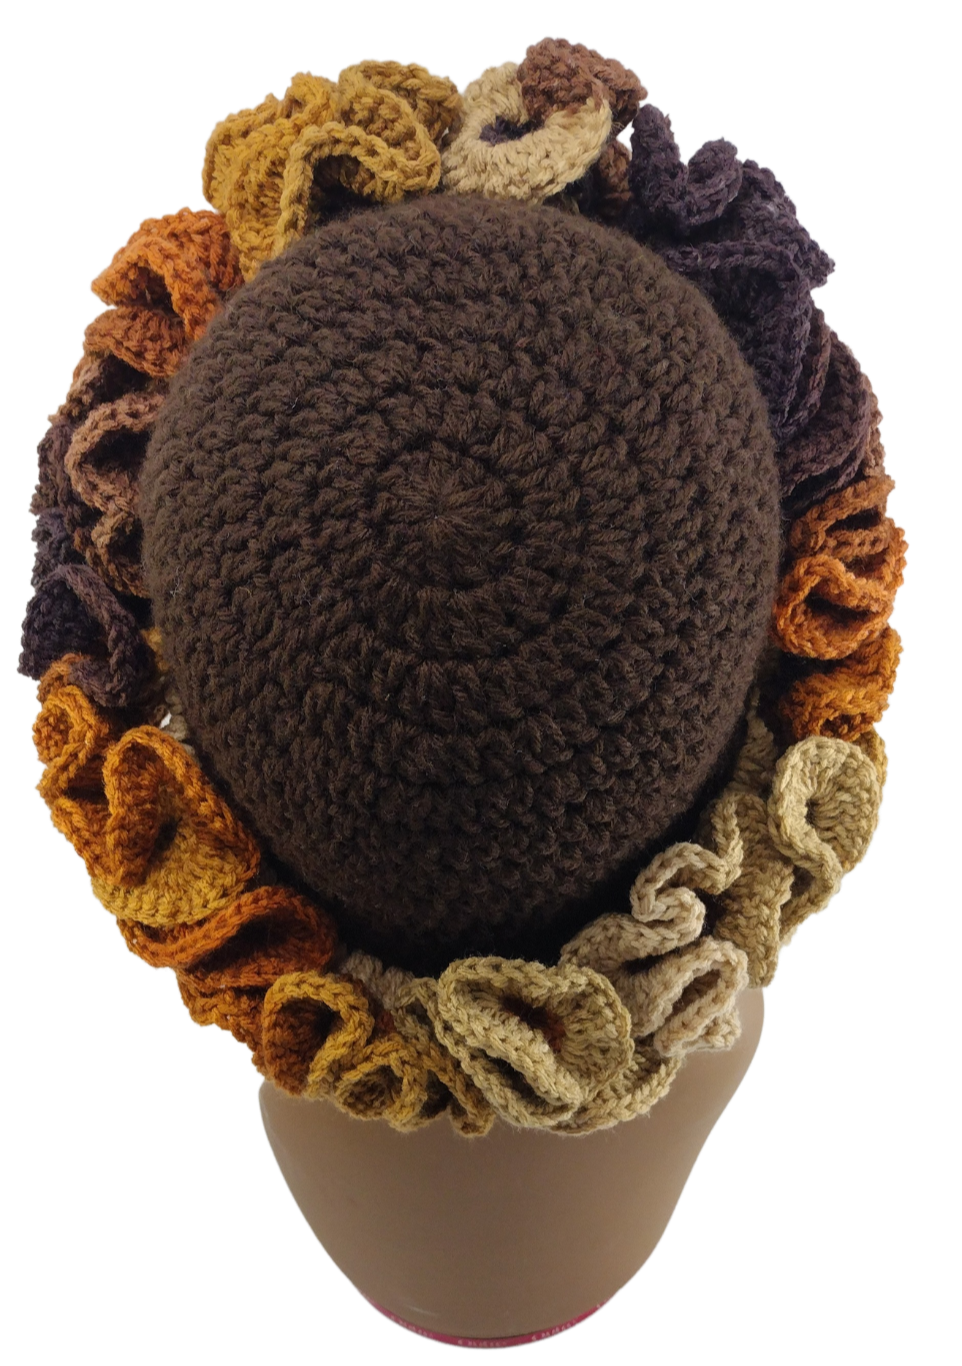 Blk Lotus Co Diva Crown: Multifaceted Shades of Brown Accessory